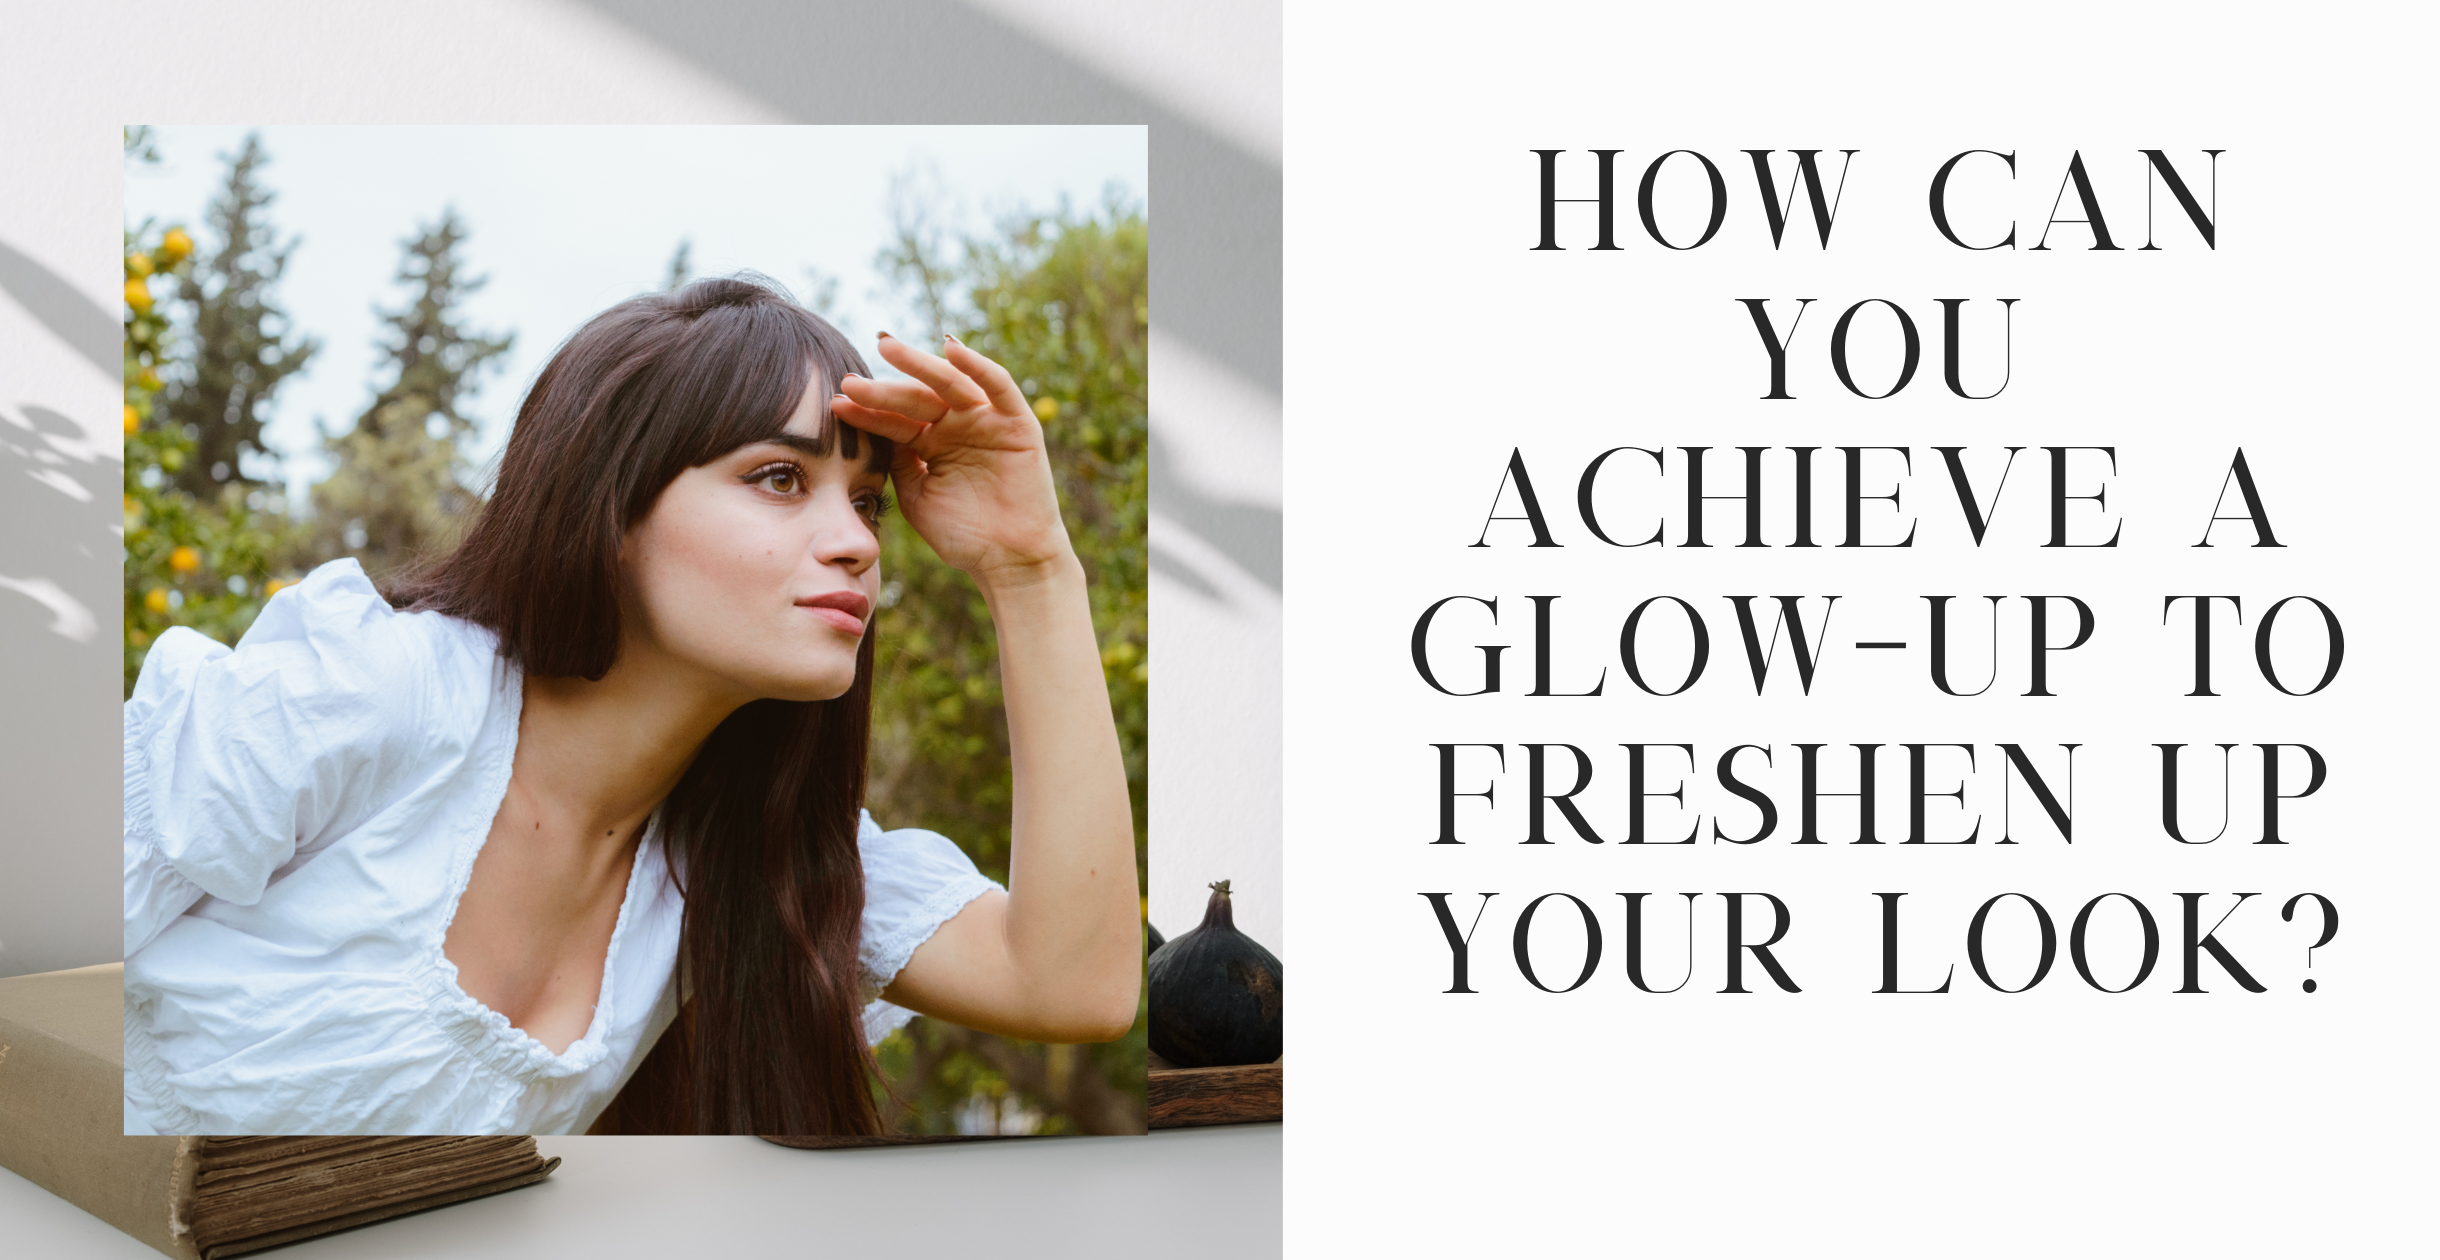 How Can You Achieve a Glow-Up to Freshen Up Your Look?